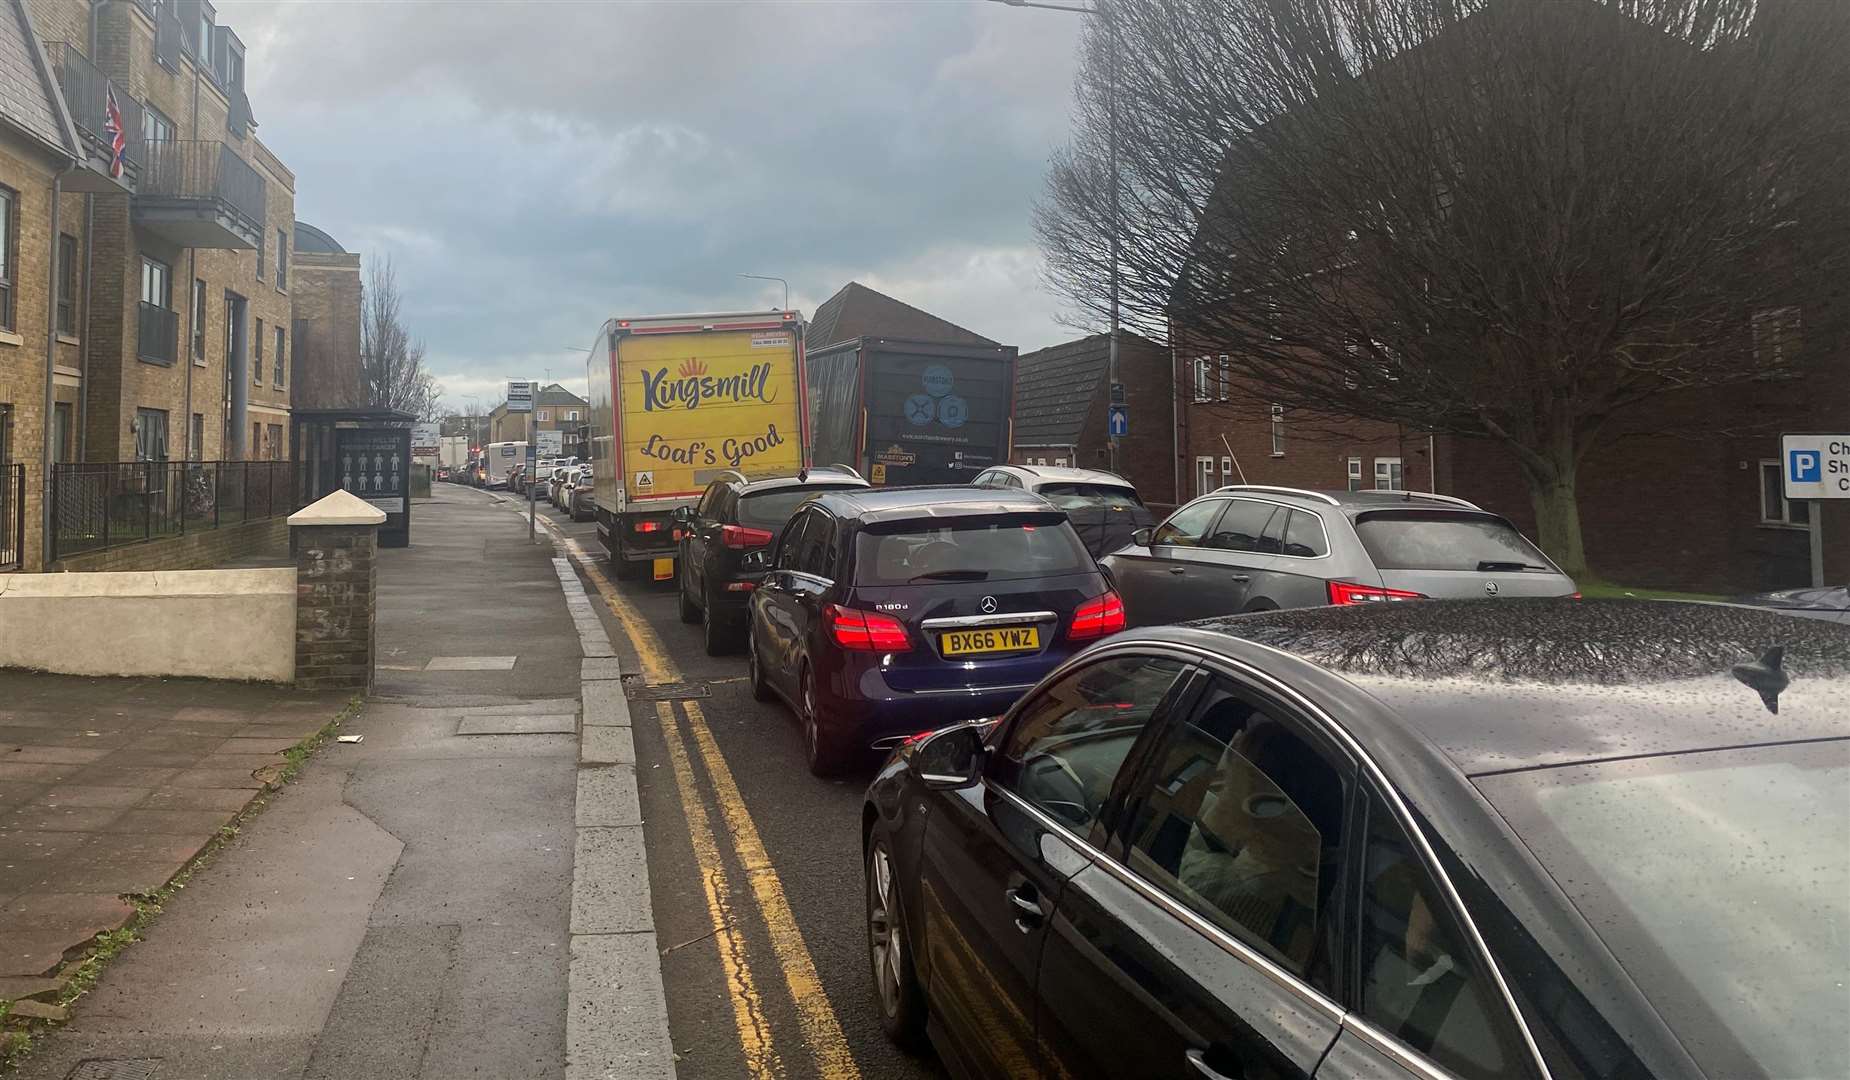 Traffic at a standstill in Maison Dieu Road, Dover, heading towards the port